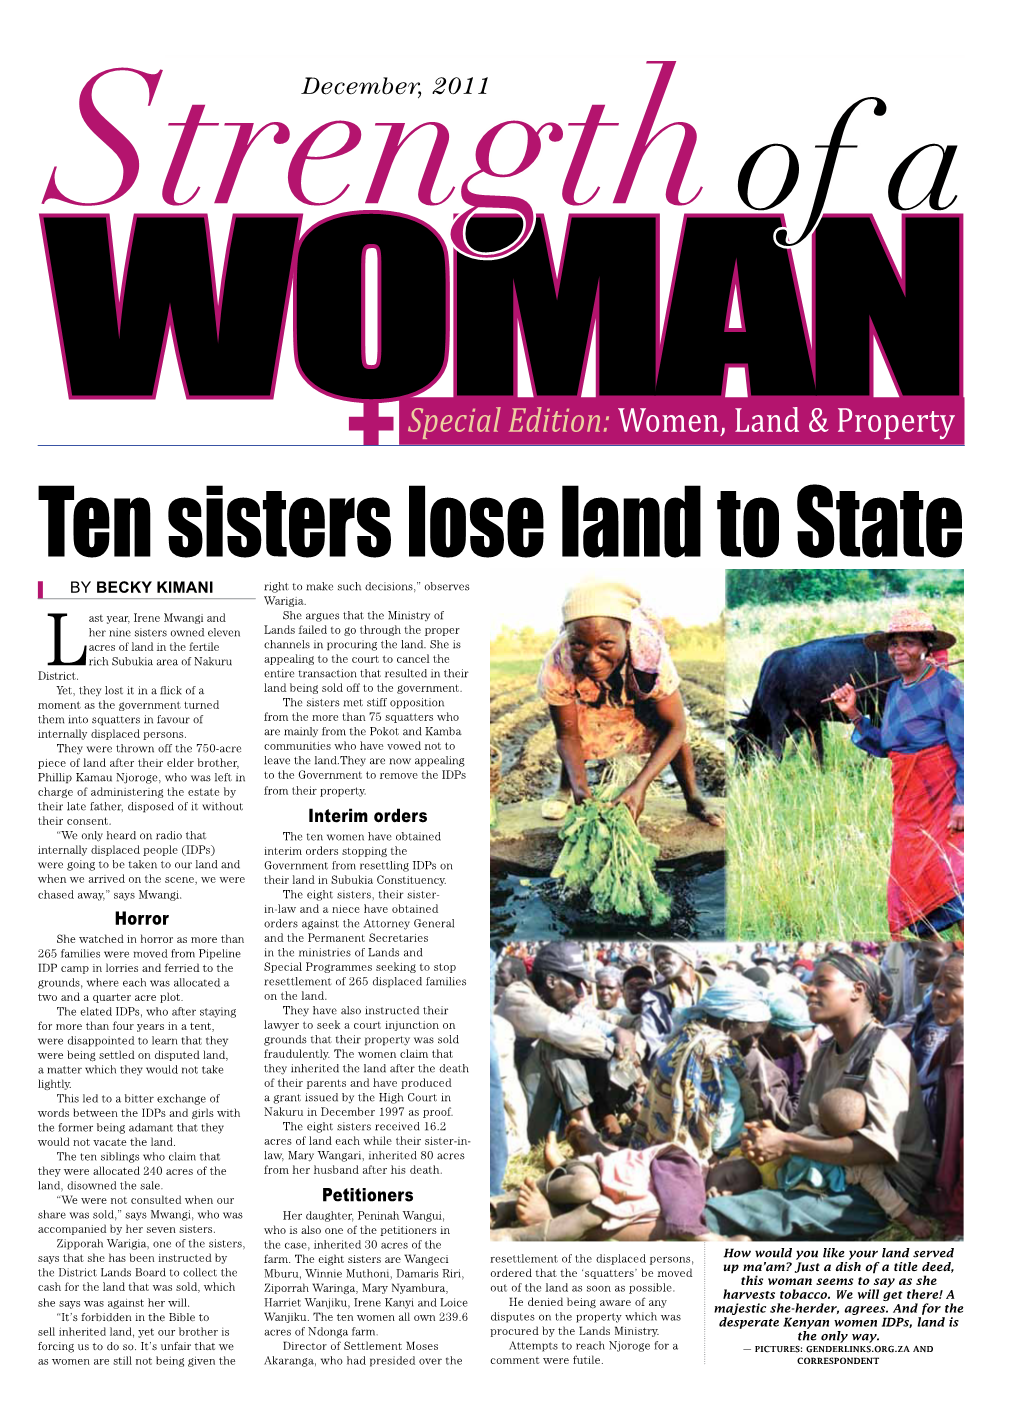 Ten Sisters Lose Land to State by Becky Kimani Right to Make Such Decisions,” Observes Warigia